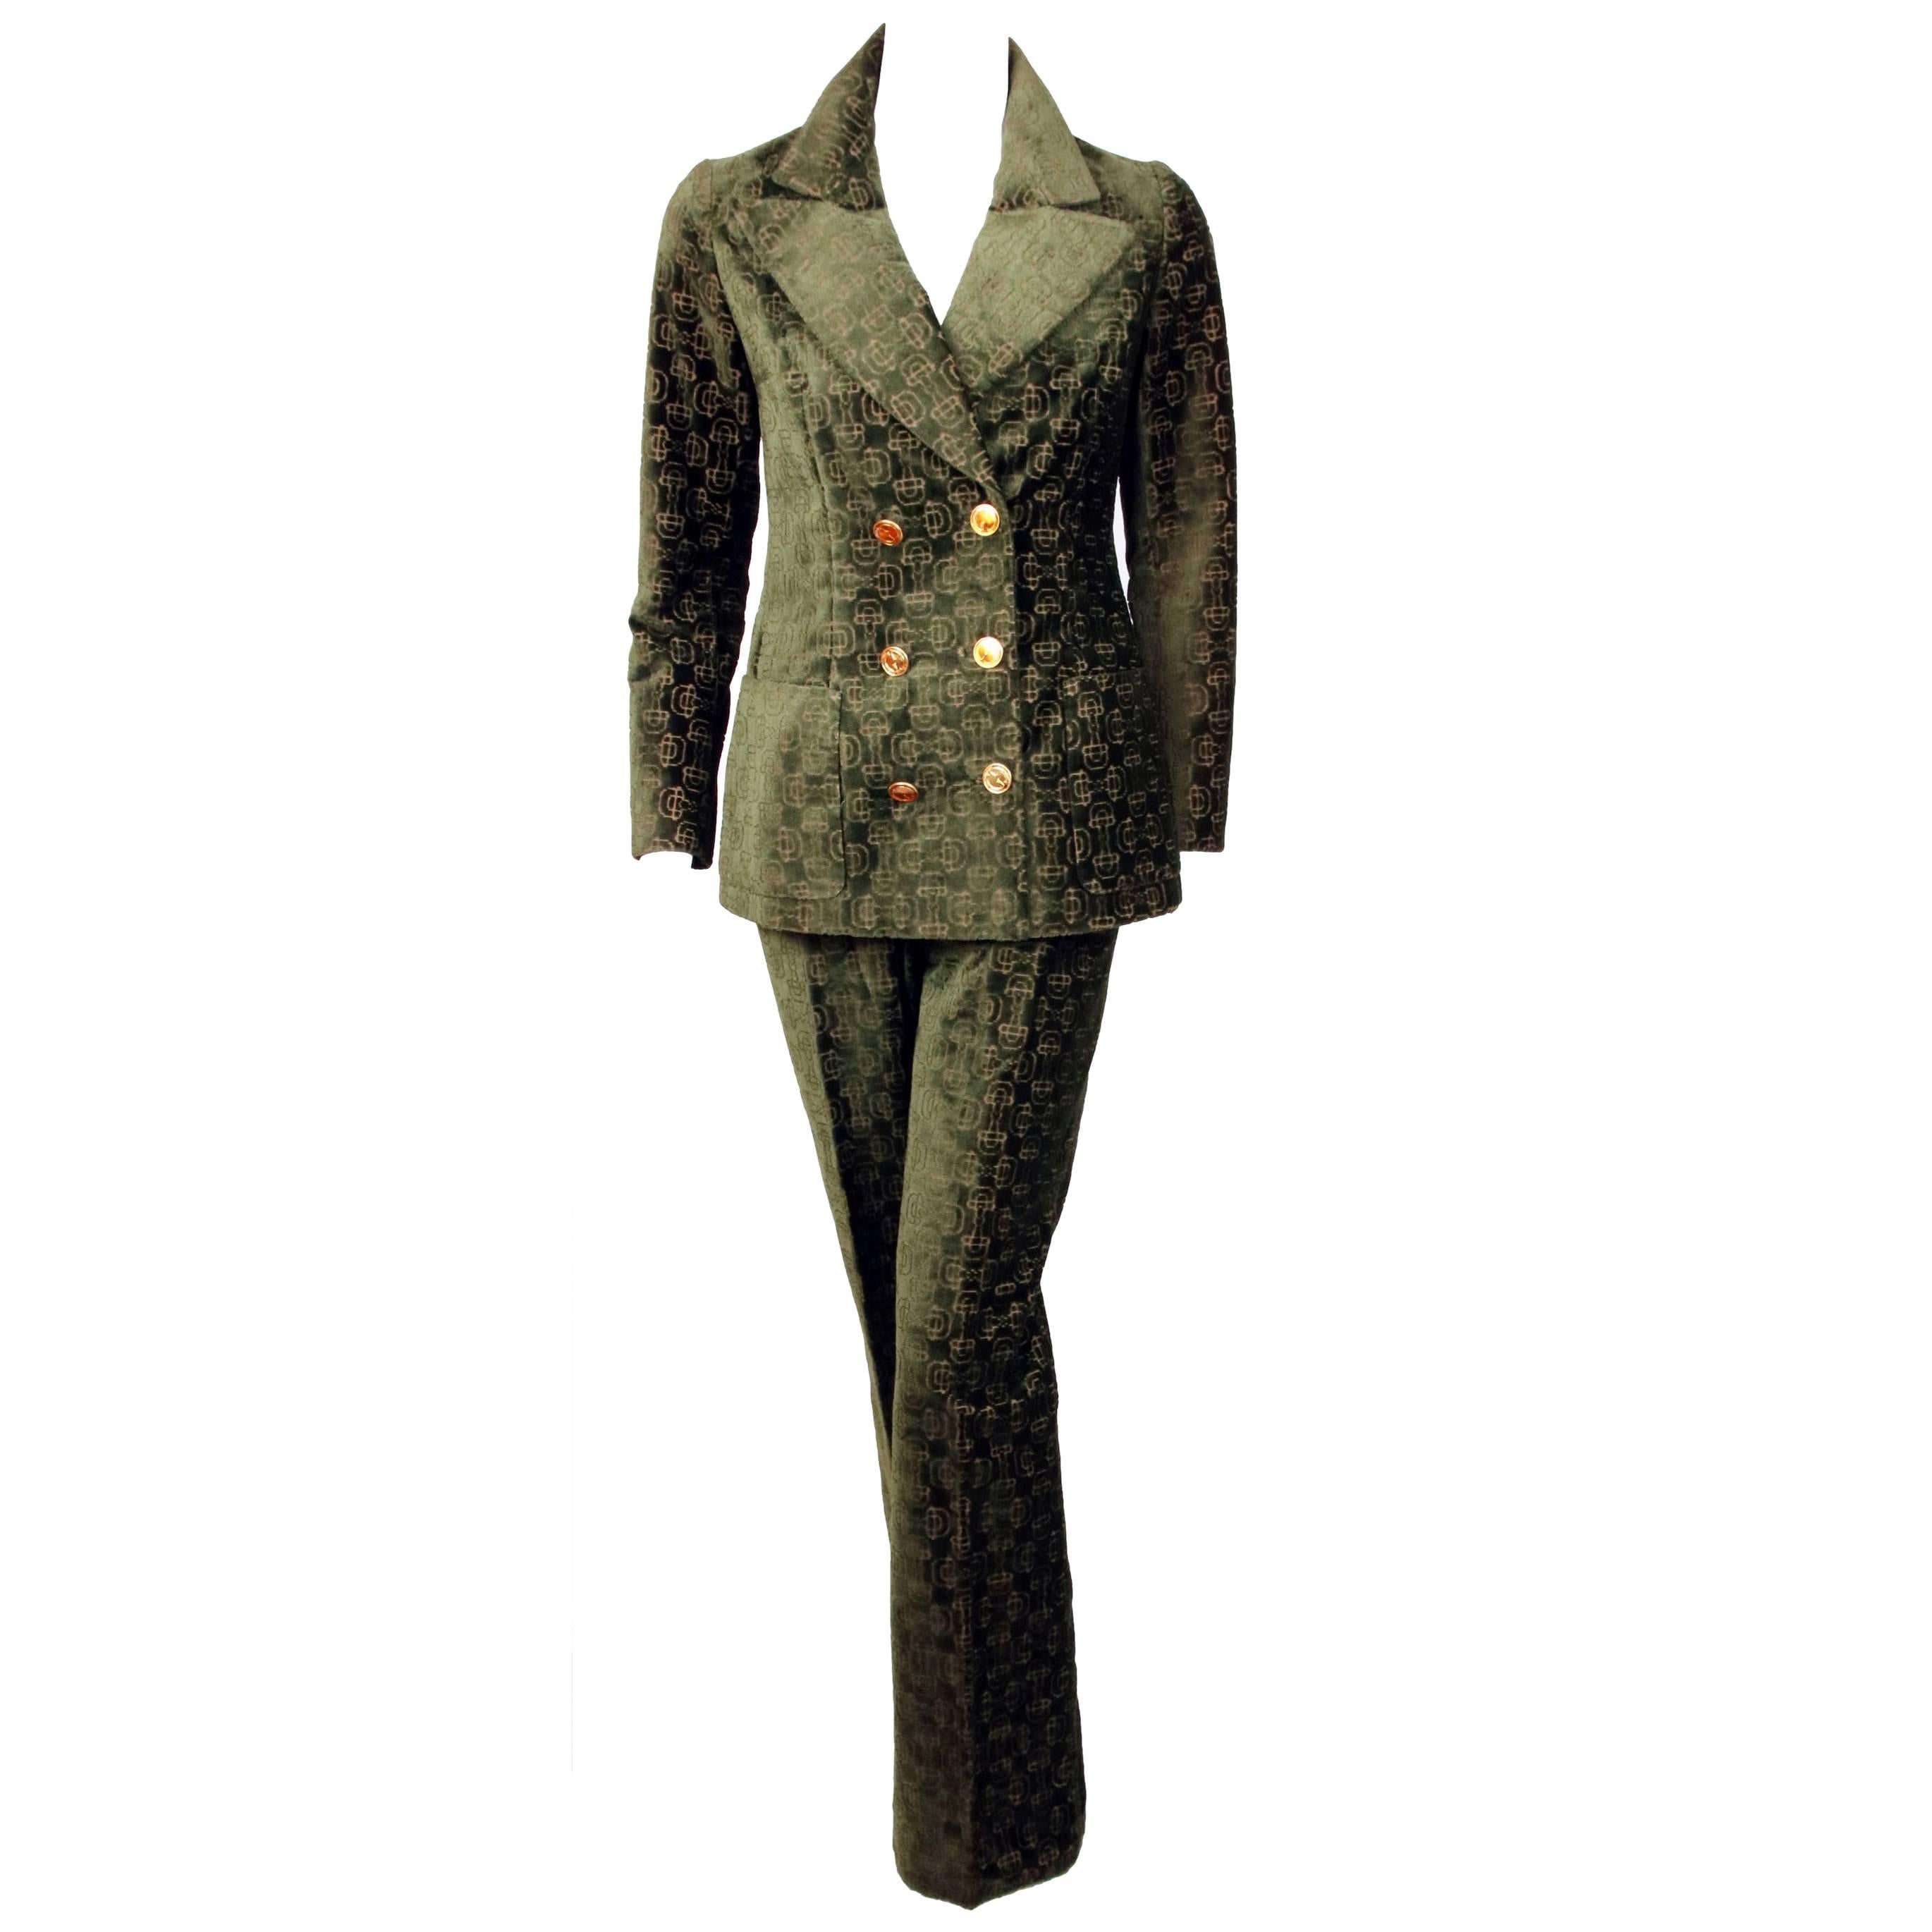 1970's Gucci cut velvet, horse bit print jacket and pant suit with Gucci logo buttons and enamel buckle attached to pants. In excellent condition. The glaze is cracked or missing on several of the buttons on the sleeve cuffs. Pants labeled a vintage